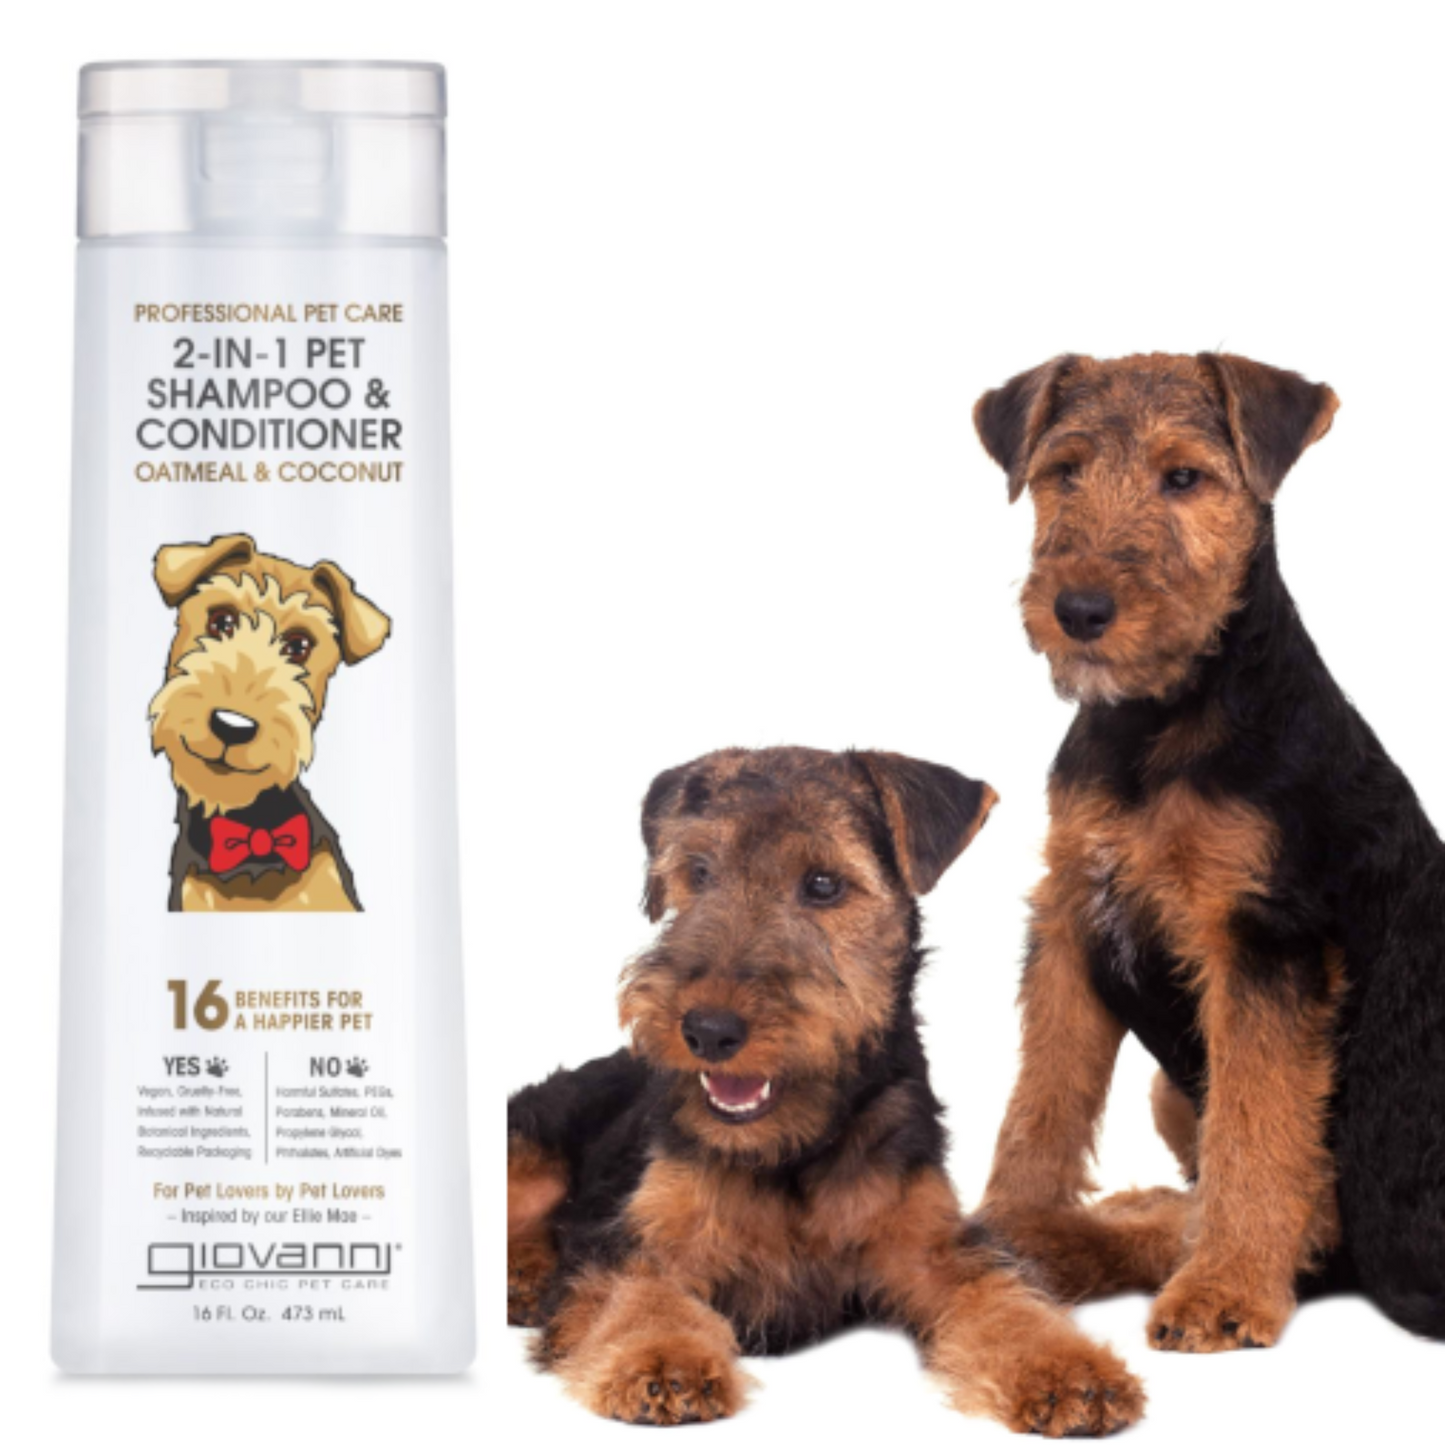 Giovanni Professional Pet 2-in-1 Pet Shampoo & Conditioner 473ml, Deeply Cleanses & Conditions Fur